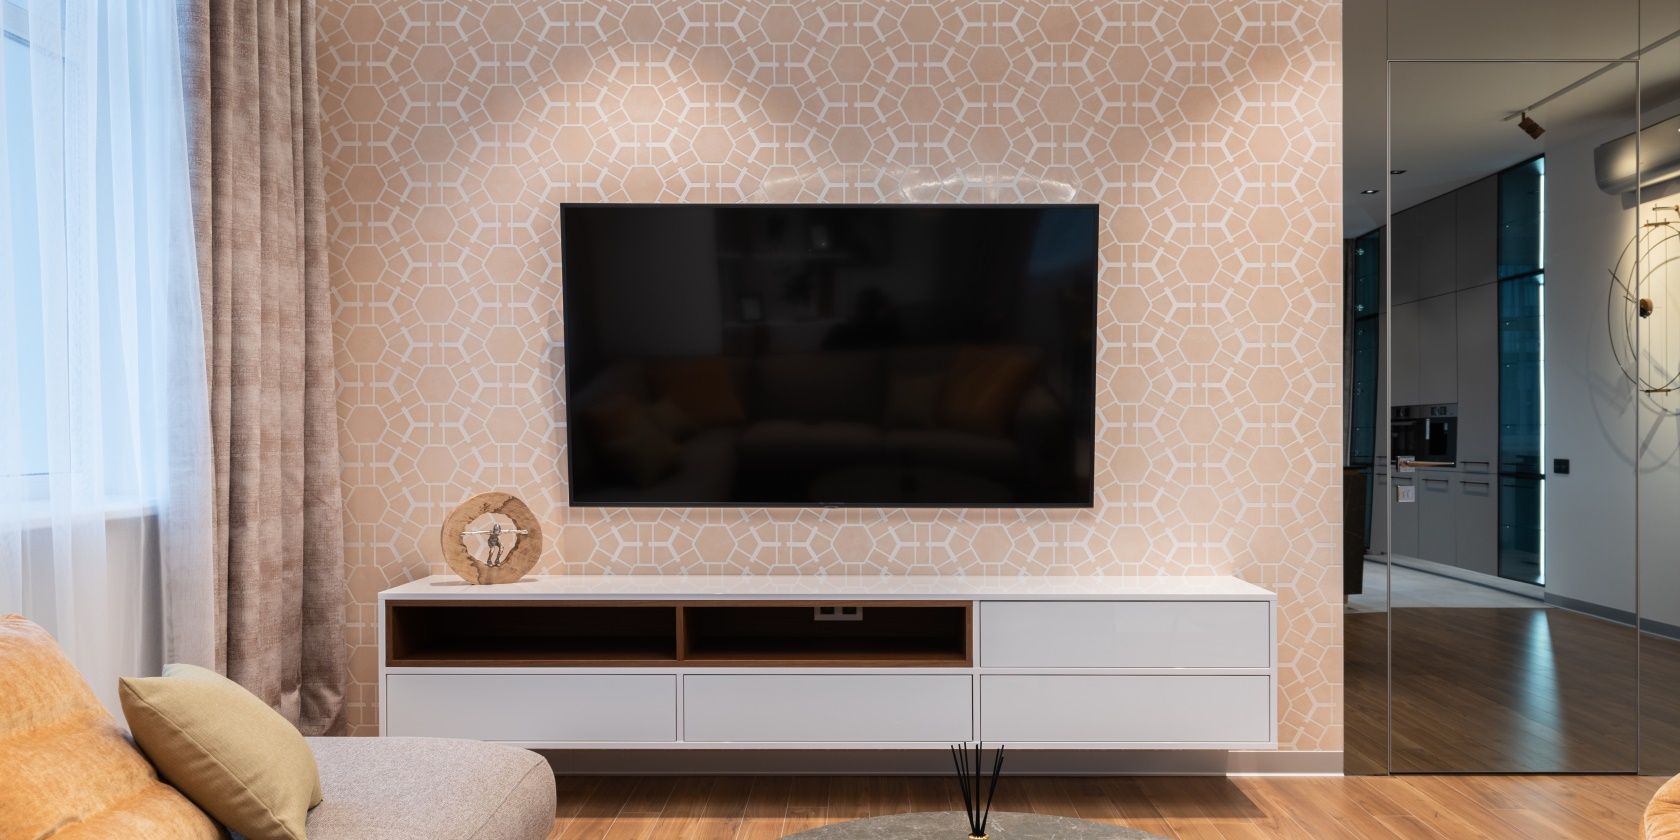 TV Wall Mount - Tips On How To Choose One